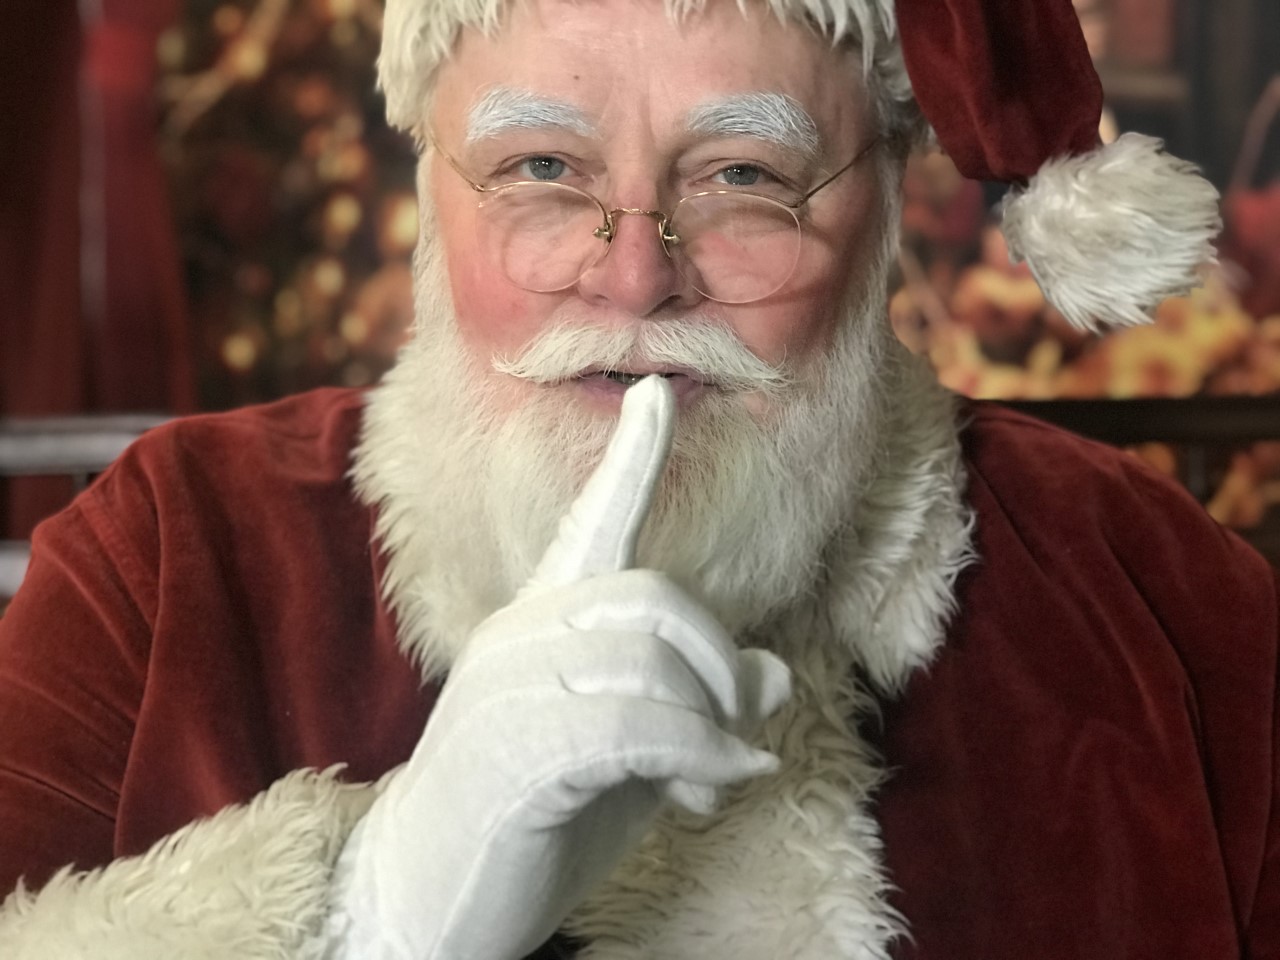 Santa motioning to be quiet with a finger to his lips